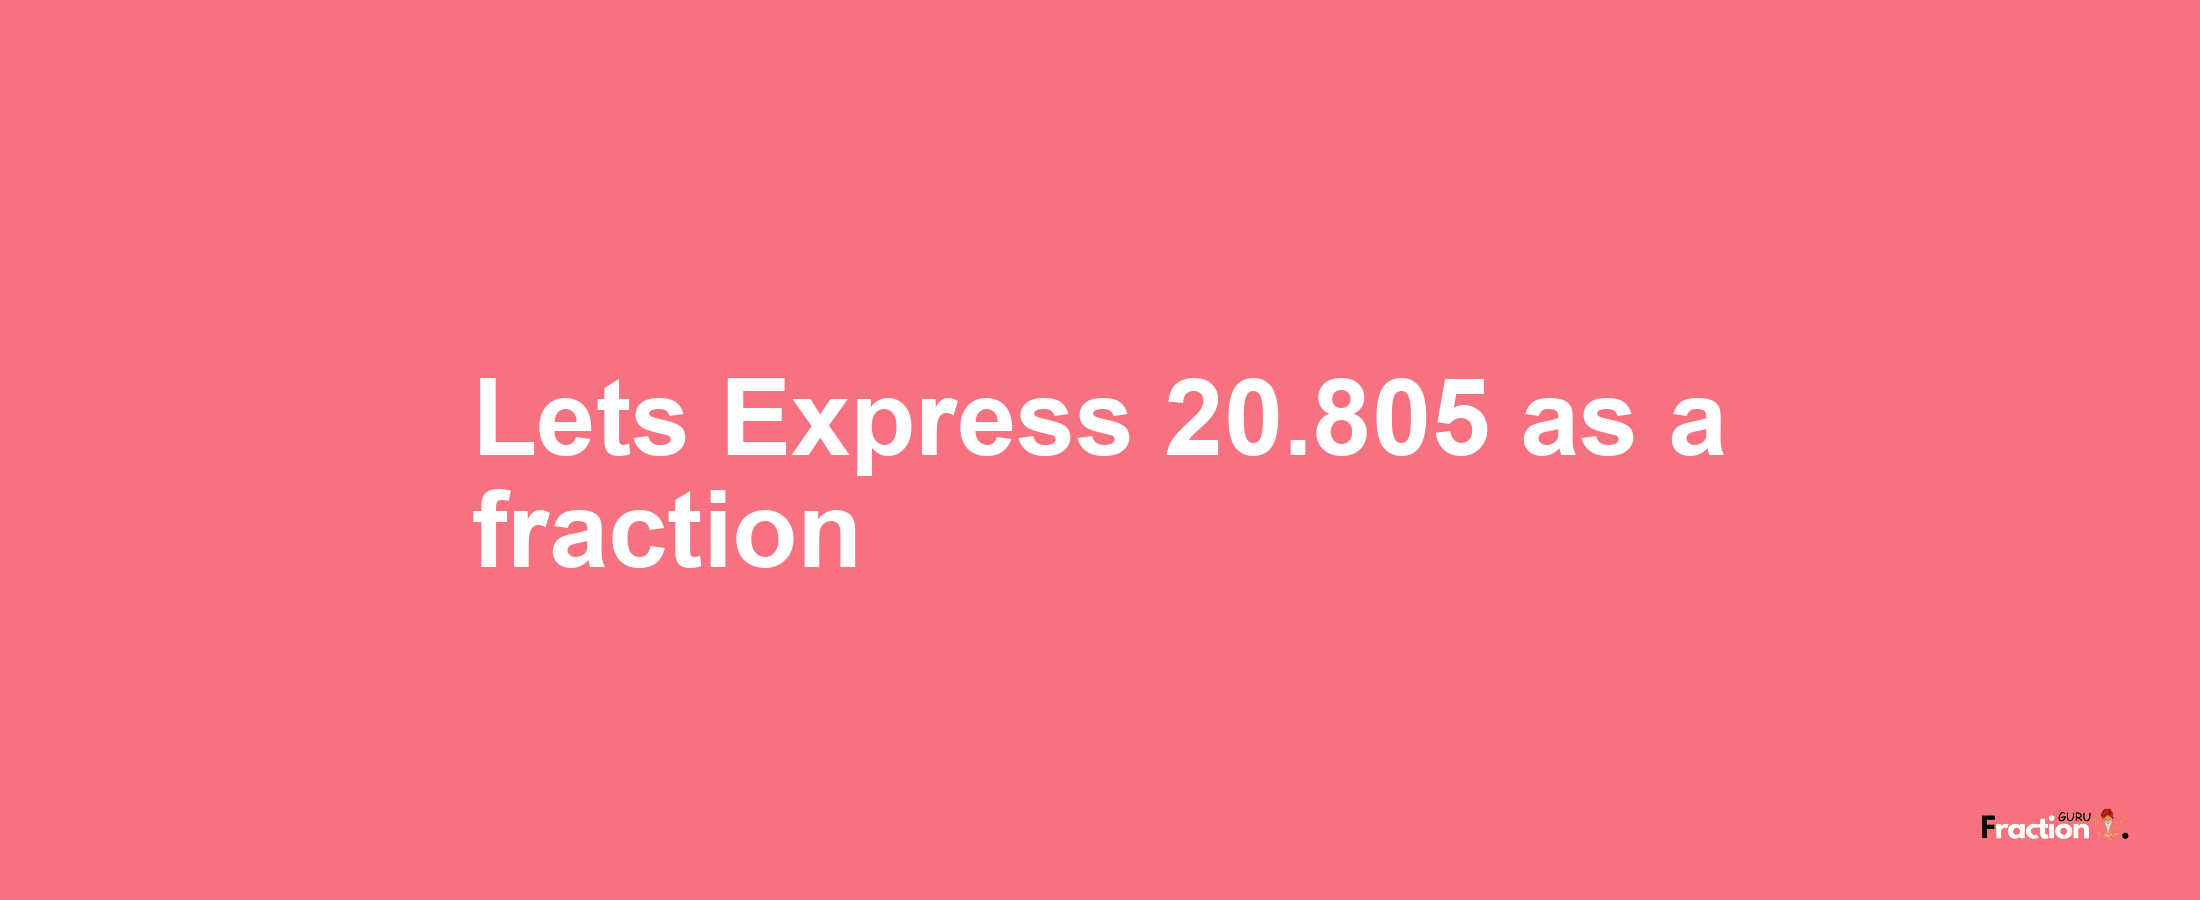 Lets Express 20.805 as afraction